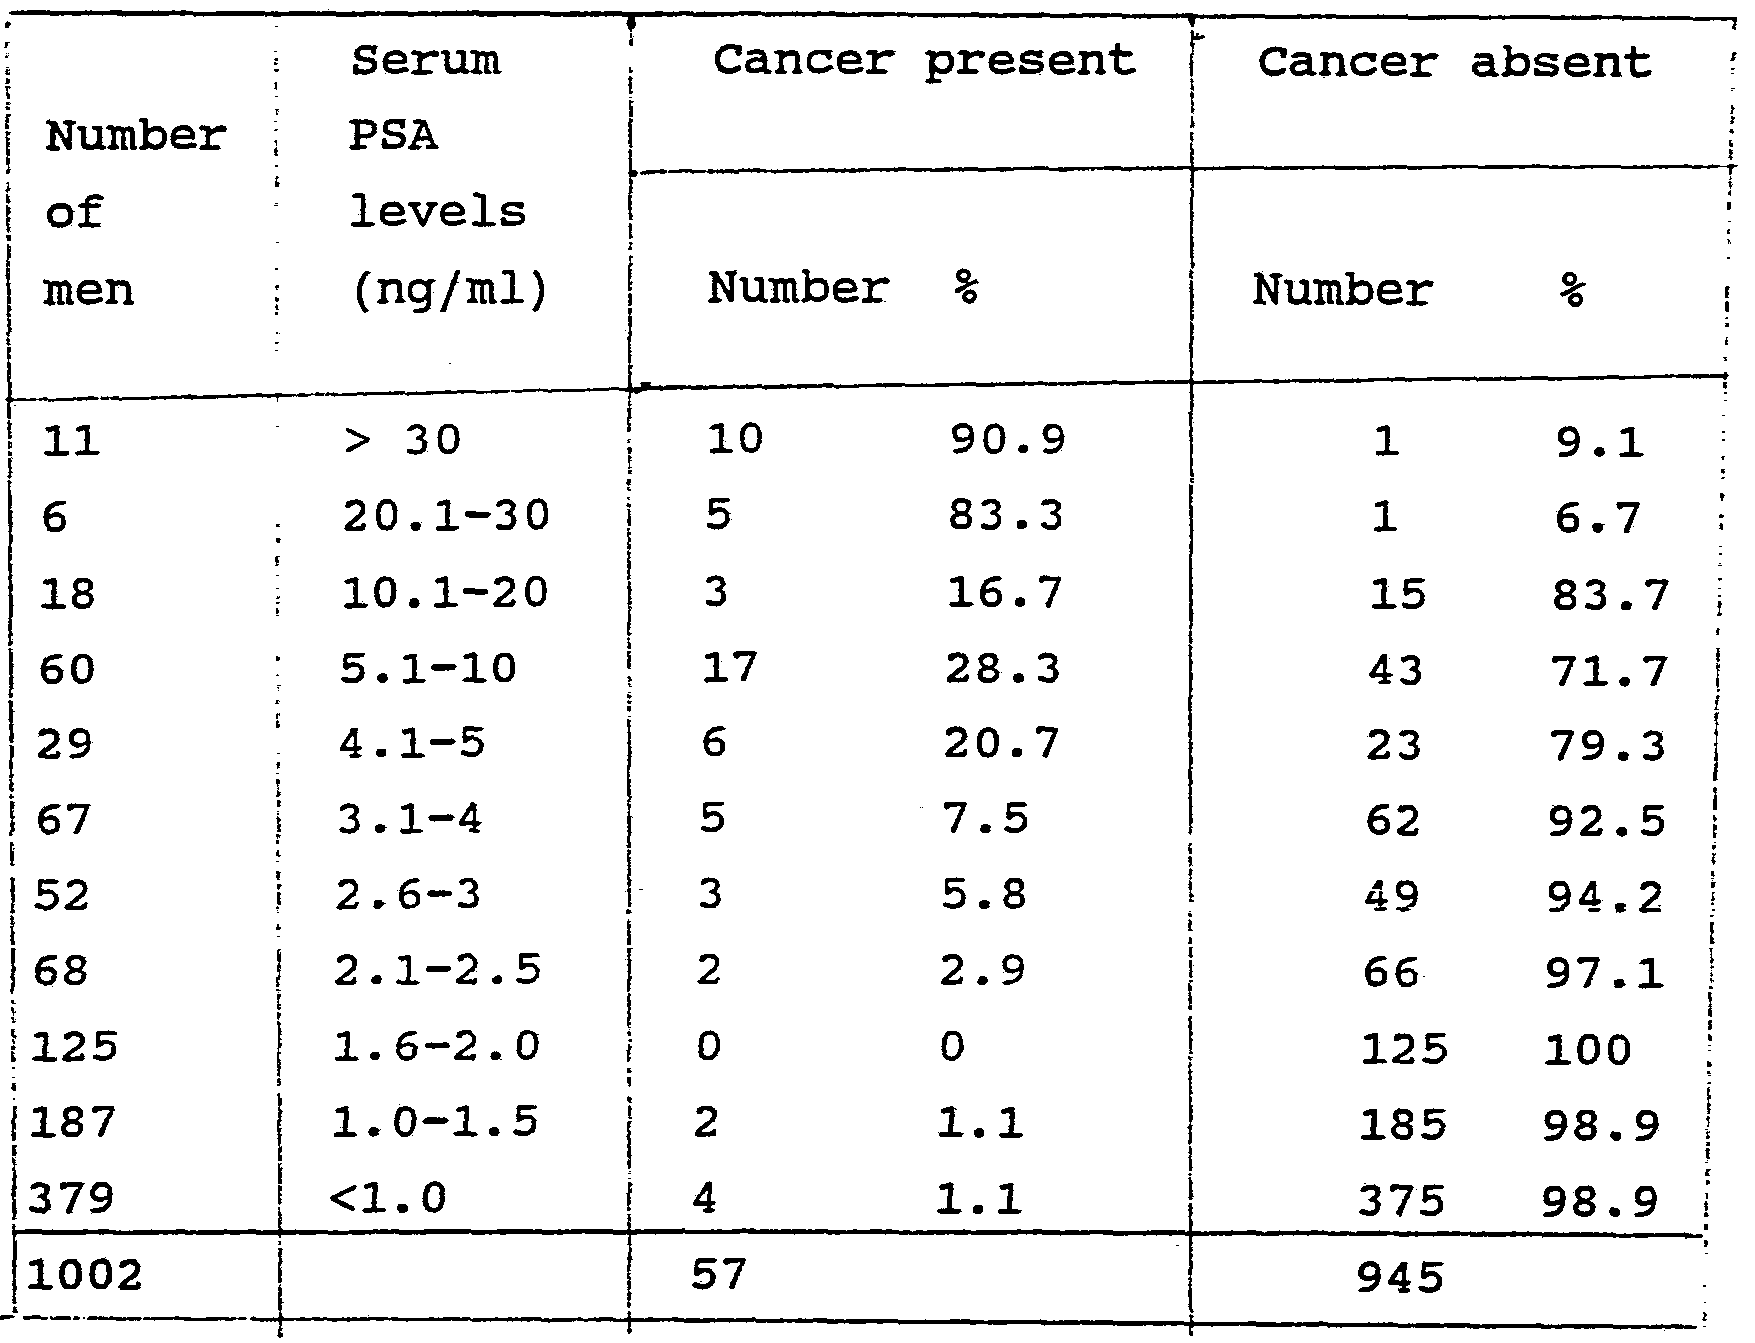 prostate results chart